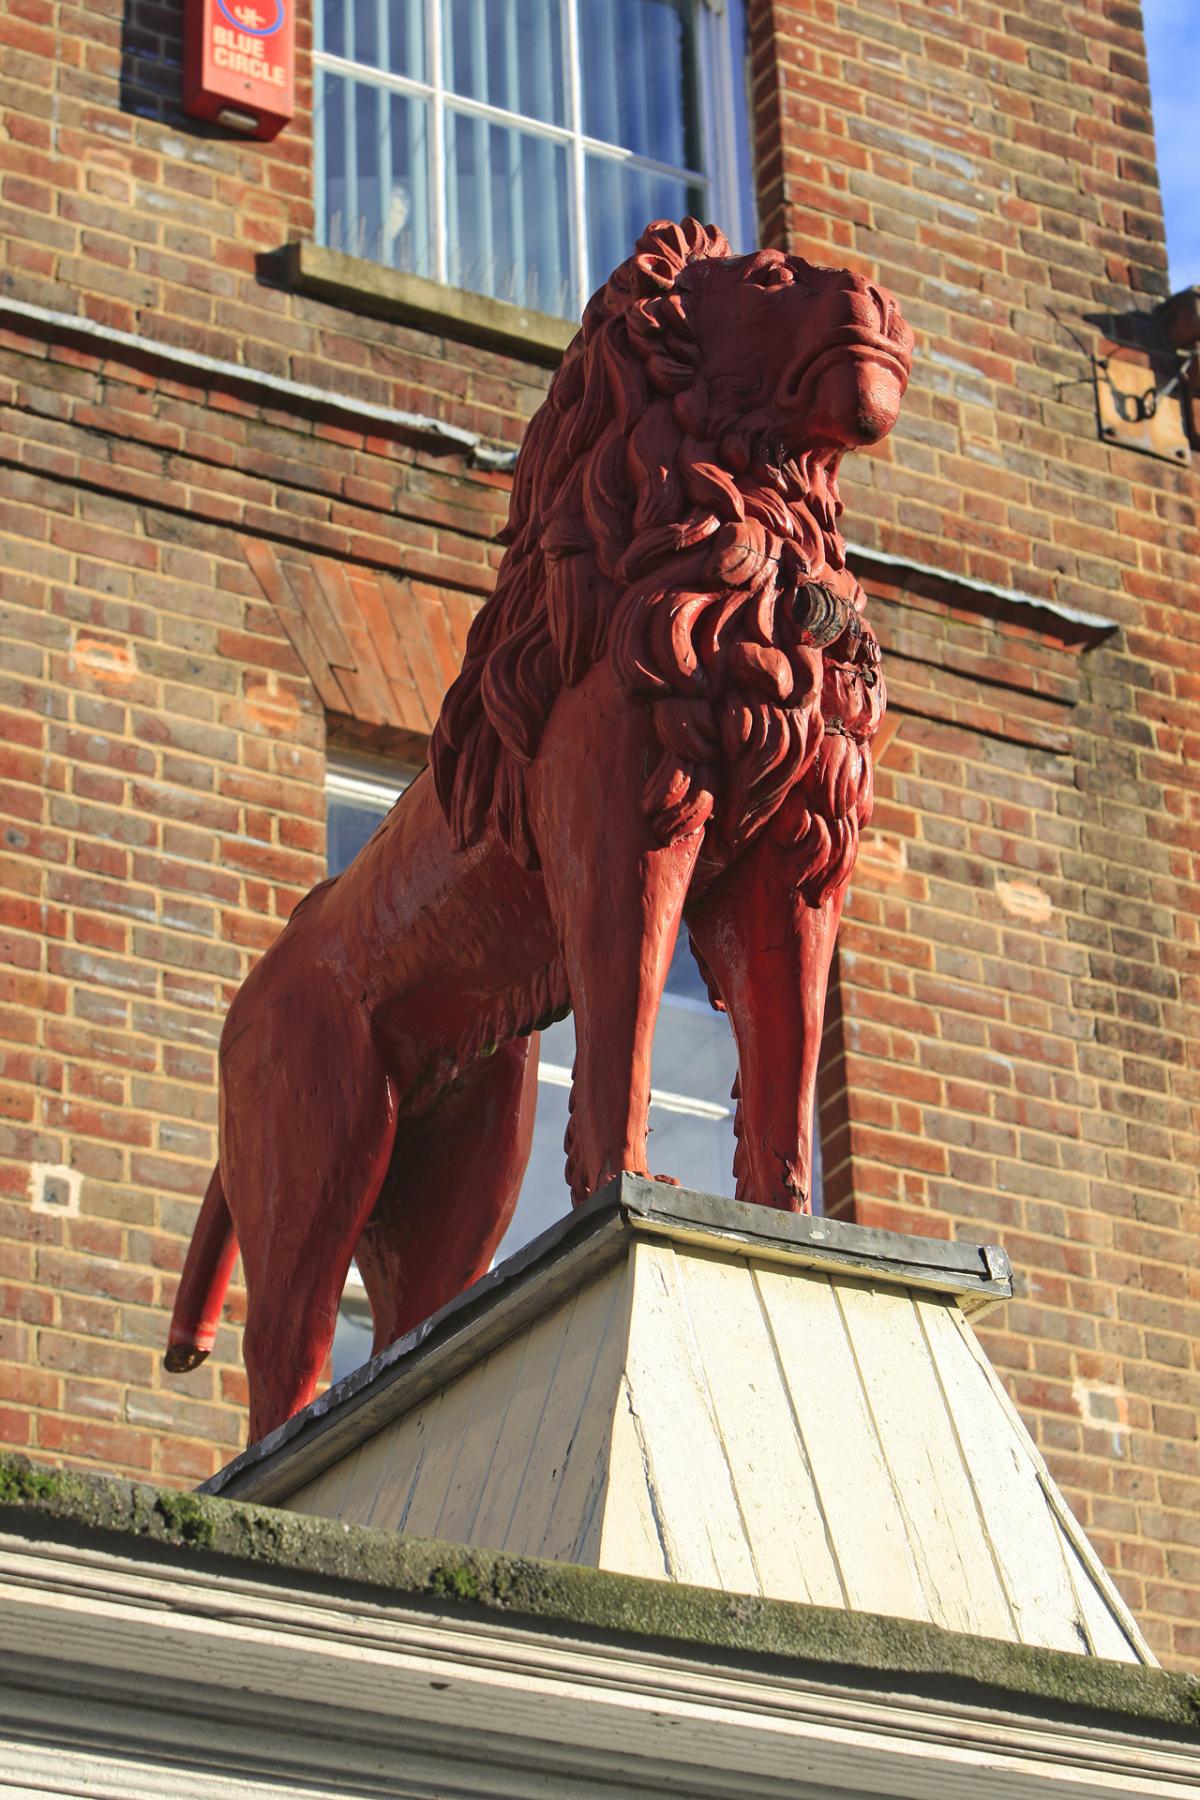 19 - Red Lion stature, in High Wycombe High Street